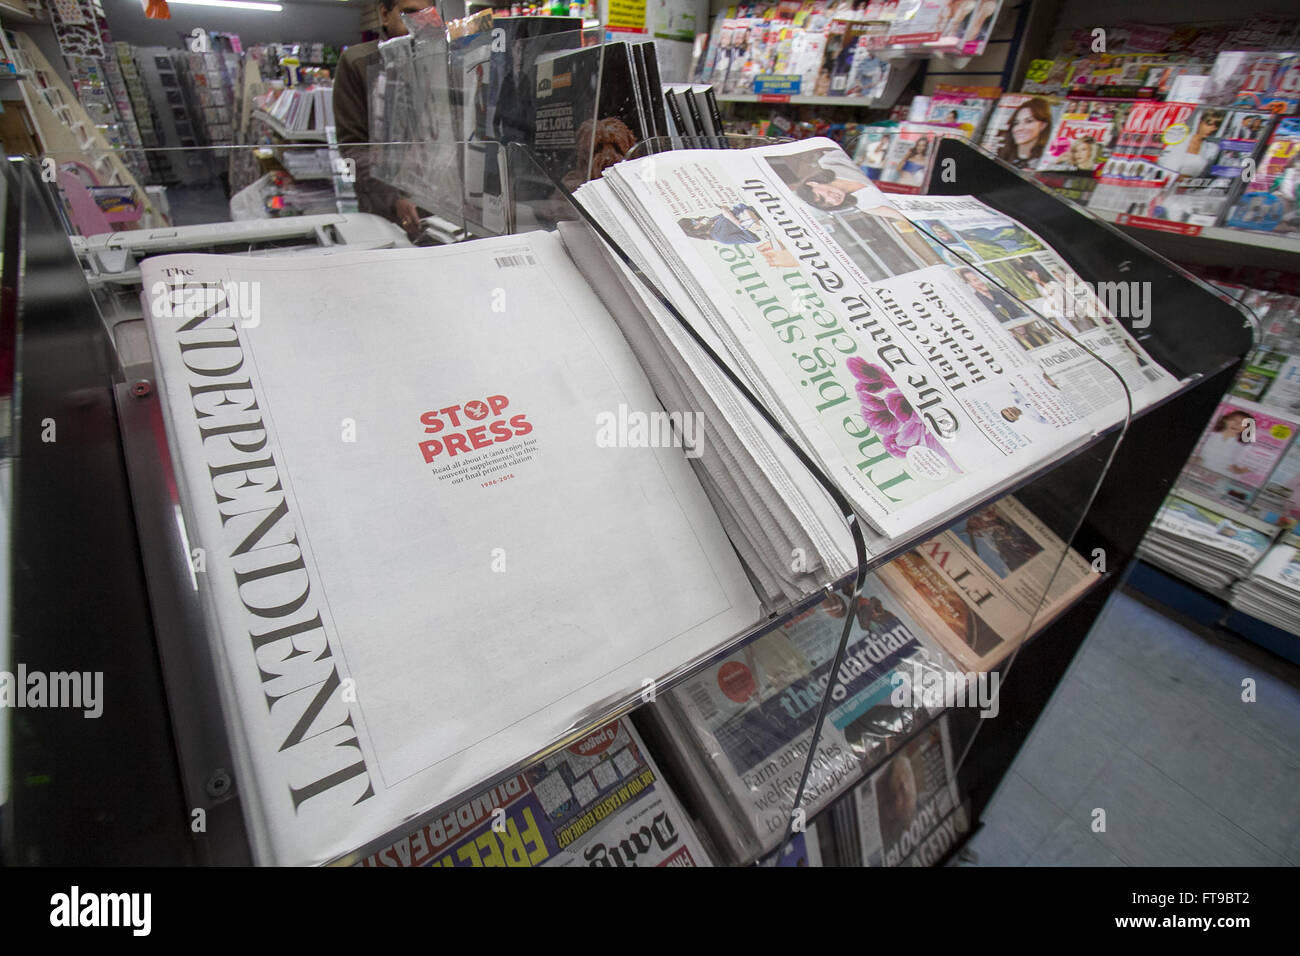 London, UK. 26th March 2016. The final print edition of the British newspaper 'The Independent' which has been in circulation since 1986. The paper will now be available in a 'digital platform only' © amer ghazzal/Alamy Live News Credit:  amer ghazzal/Alamy Live News Stock Photo